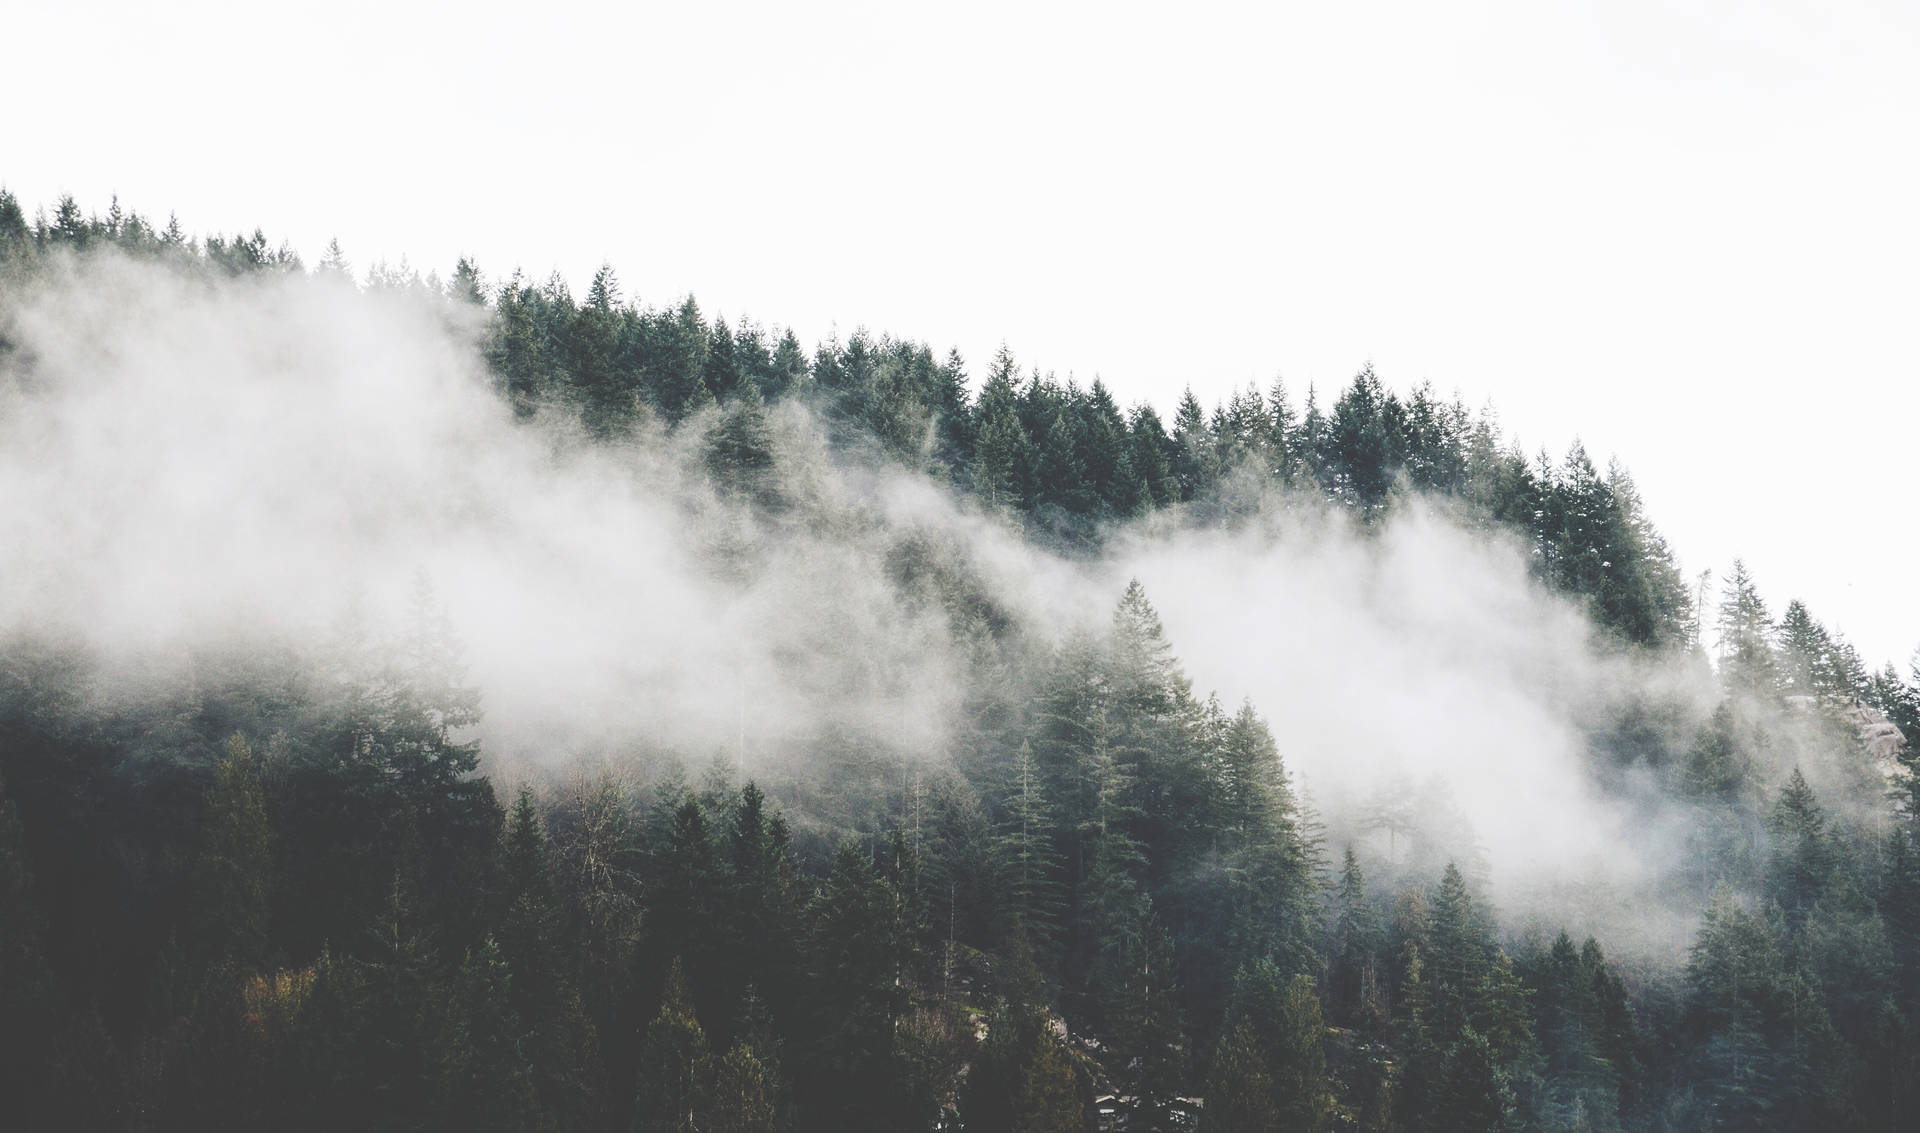 Free Foggy Forest Wallpaper Downloads, Foggy Forest Wallpaper for FREE